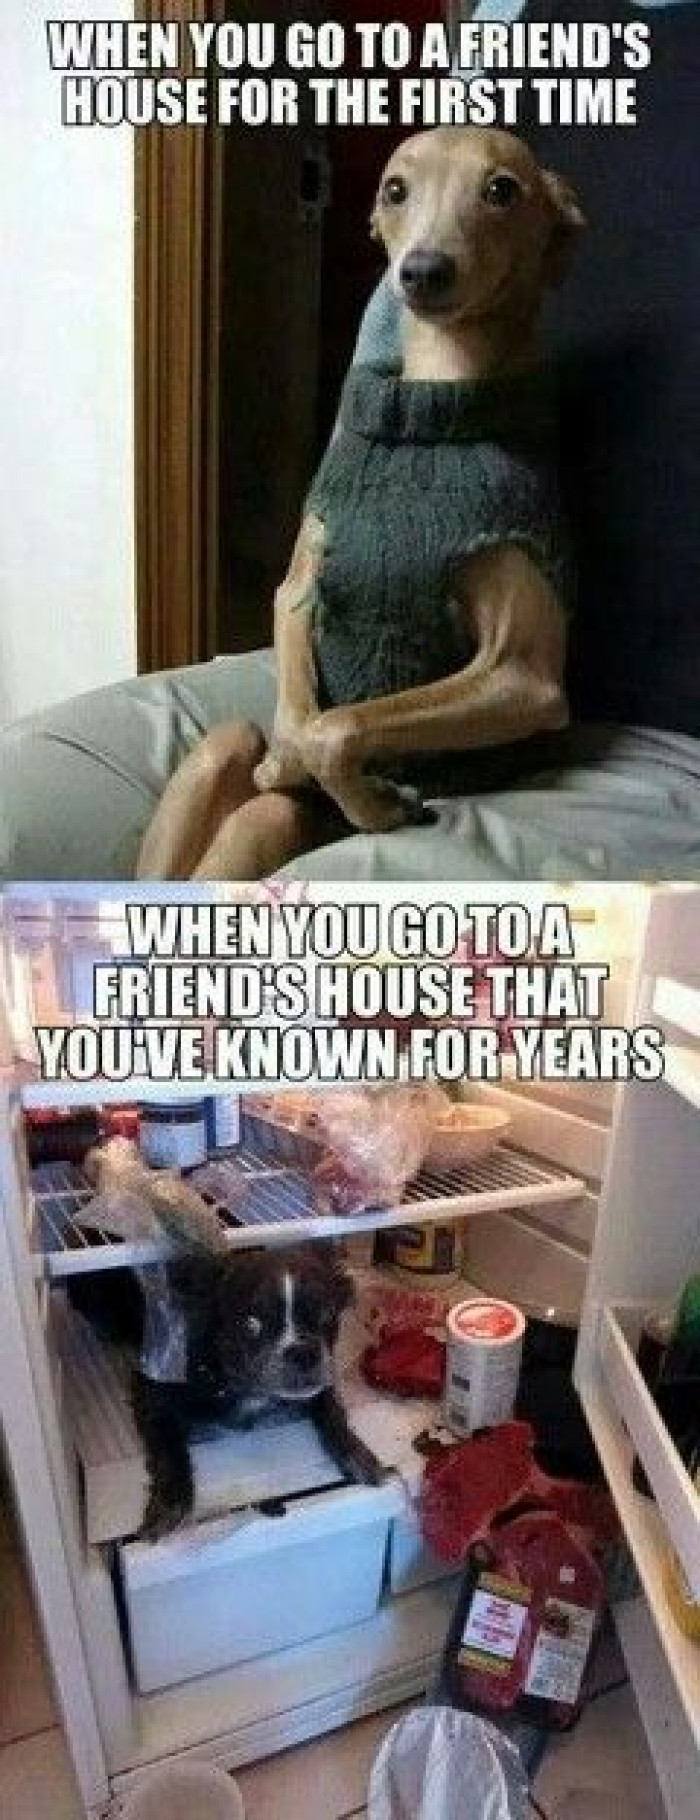 When You Go To A Friend's House...